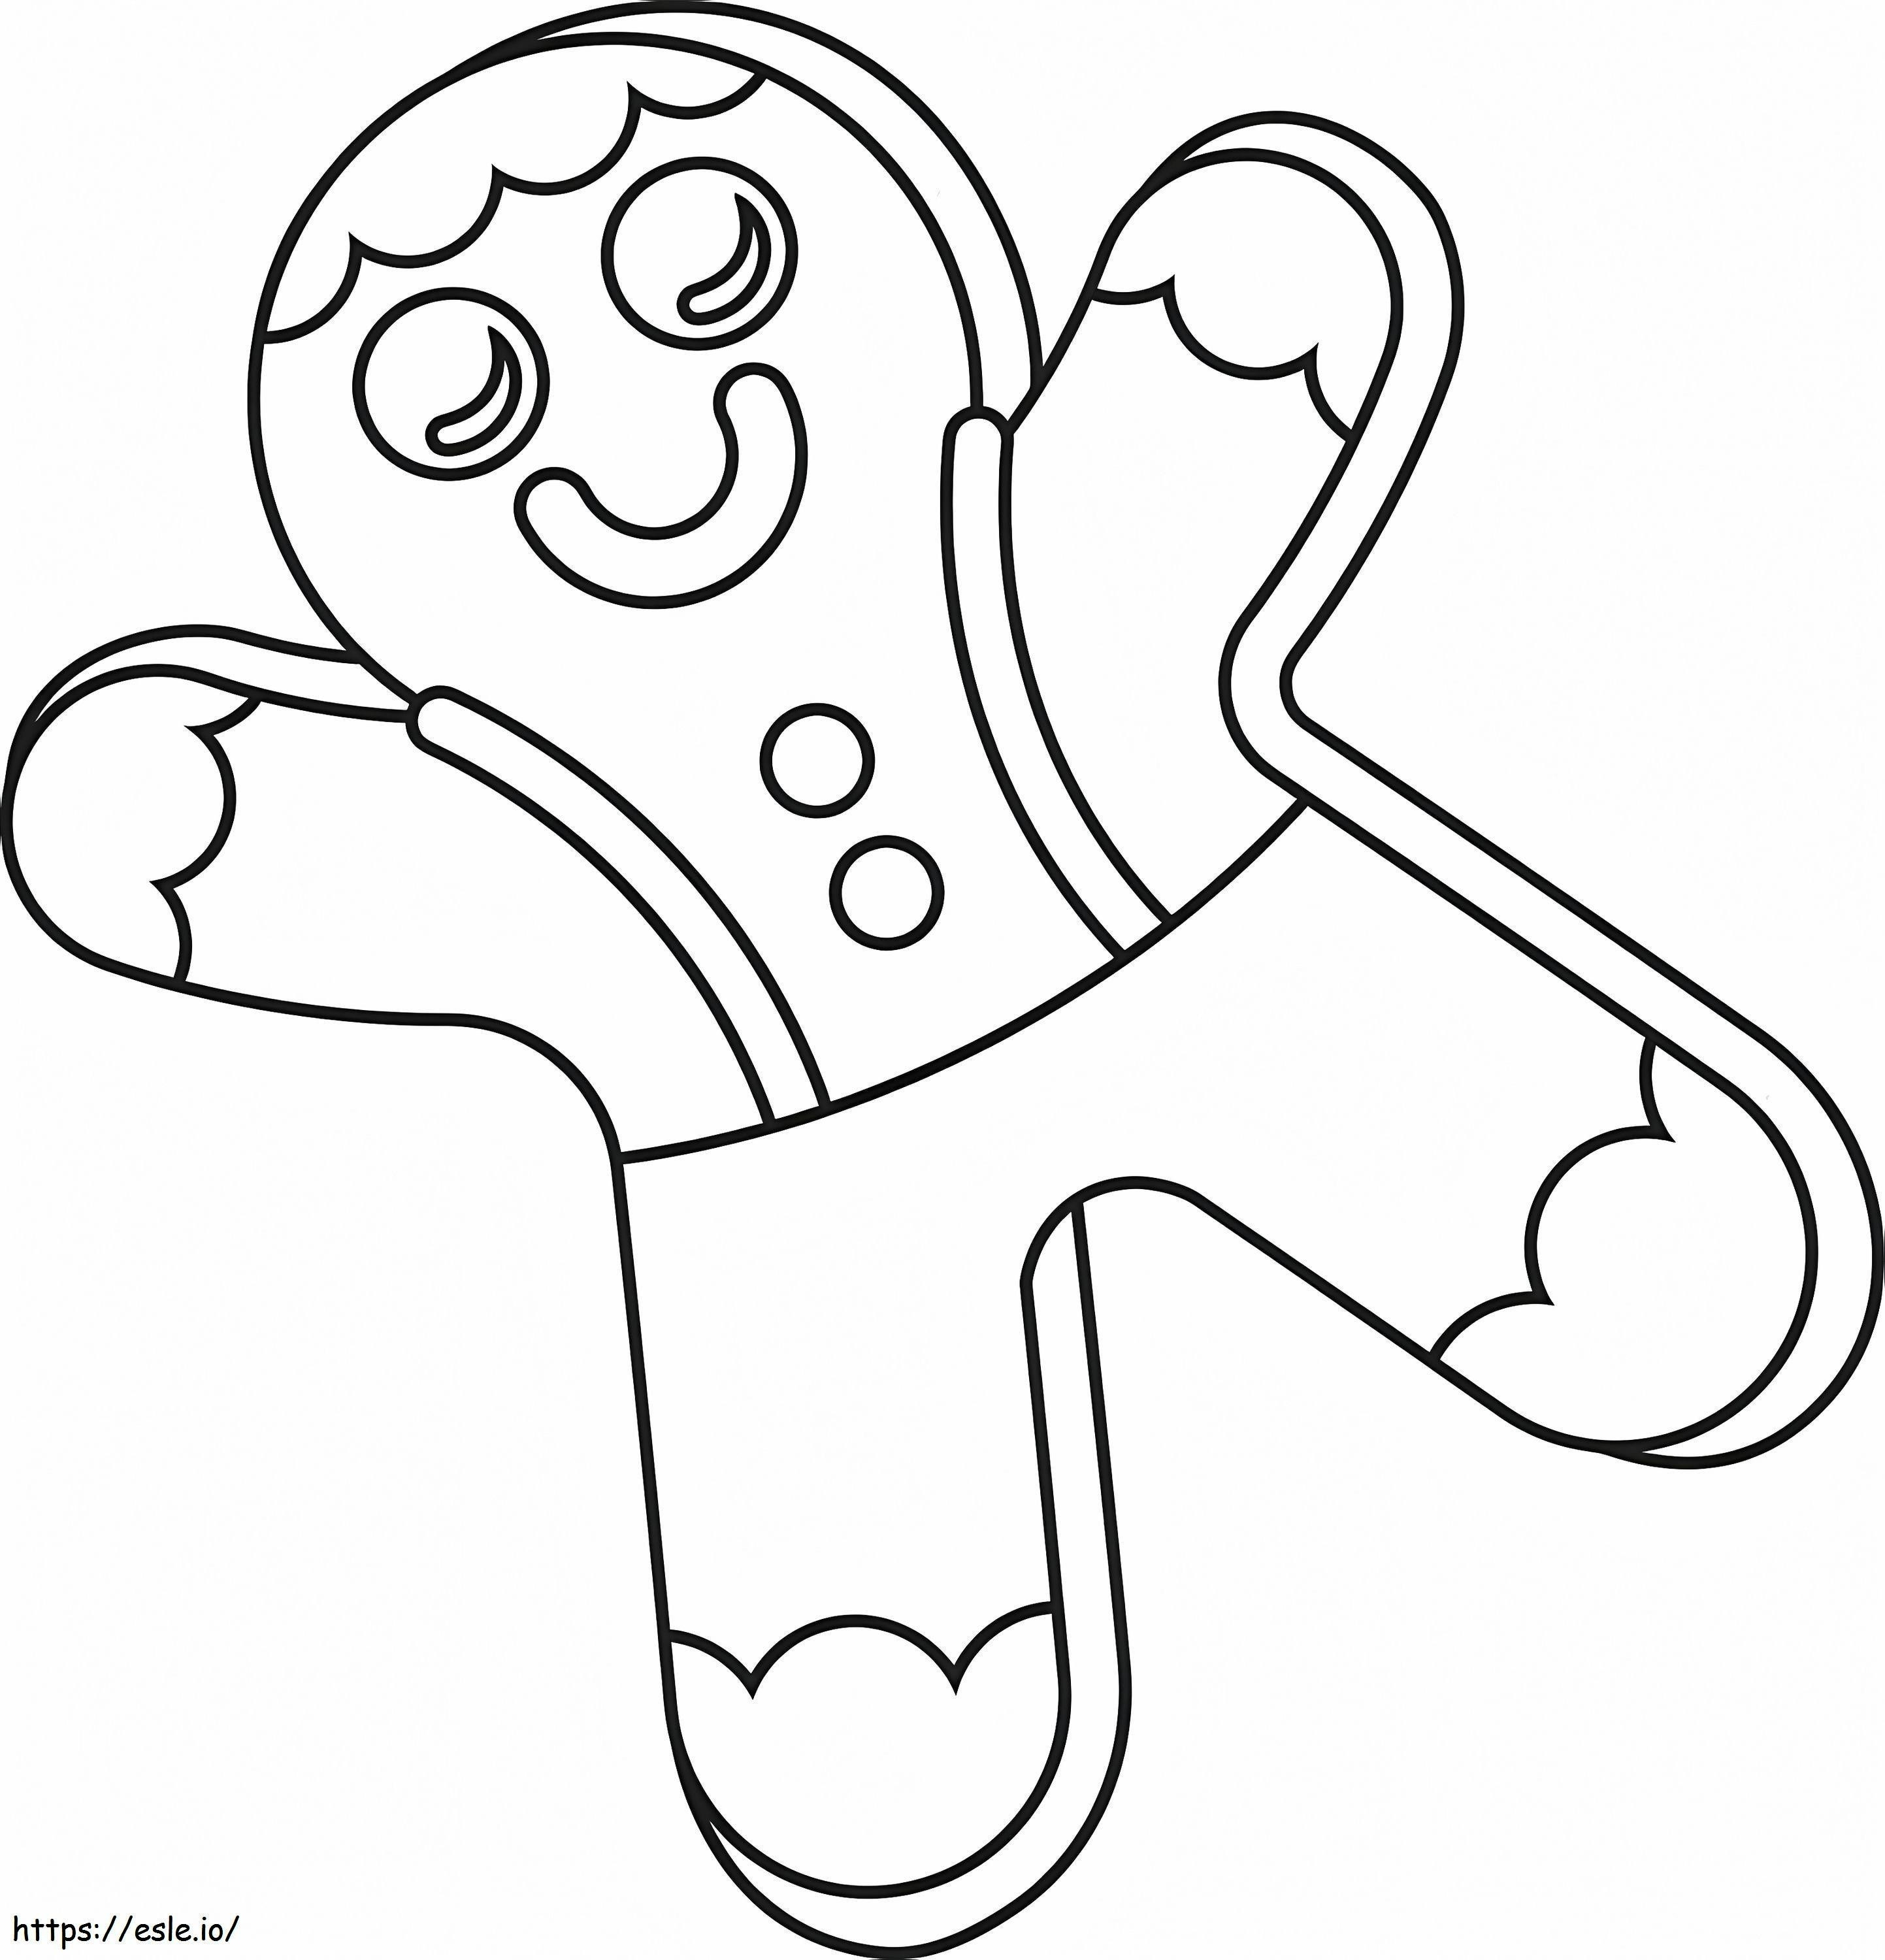 Cute Gingerbread Man coloring page